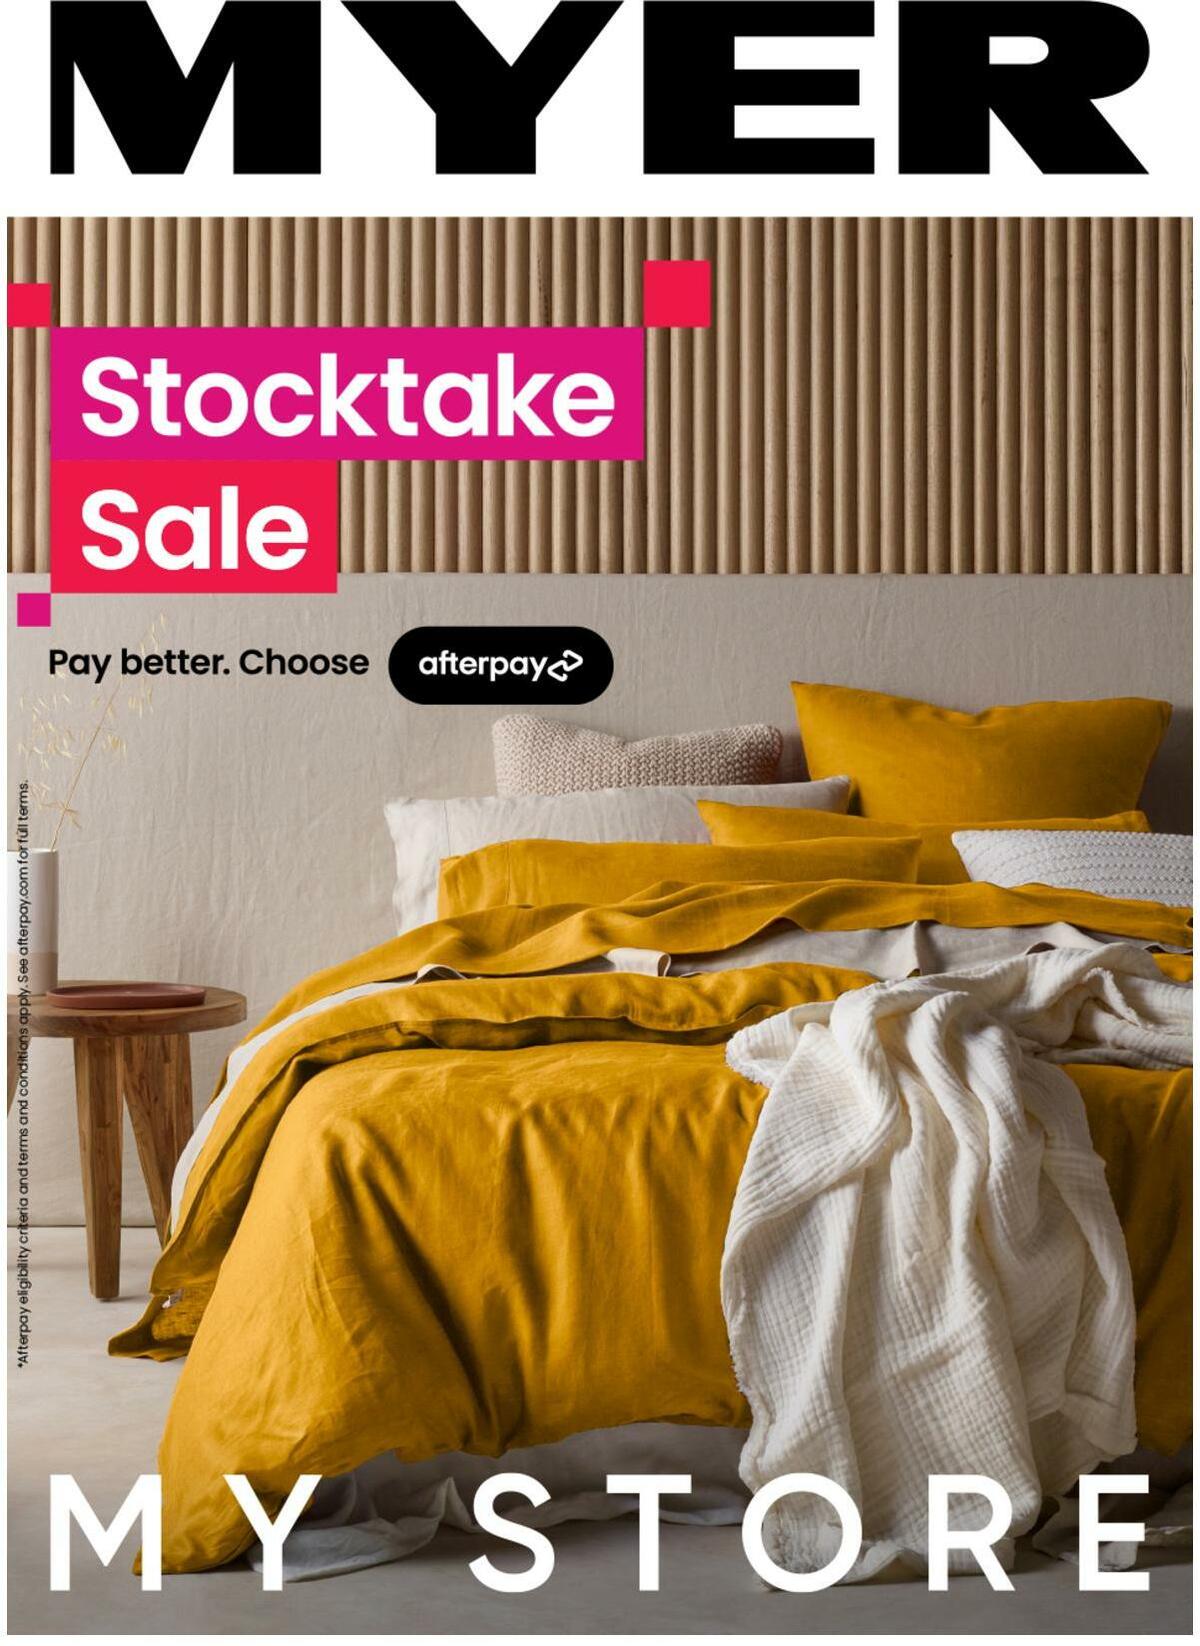 Myer Stocktake Sale - Hardgoods Catalogues from 8 June